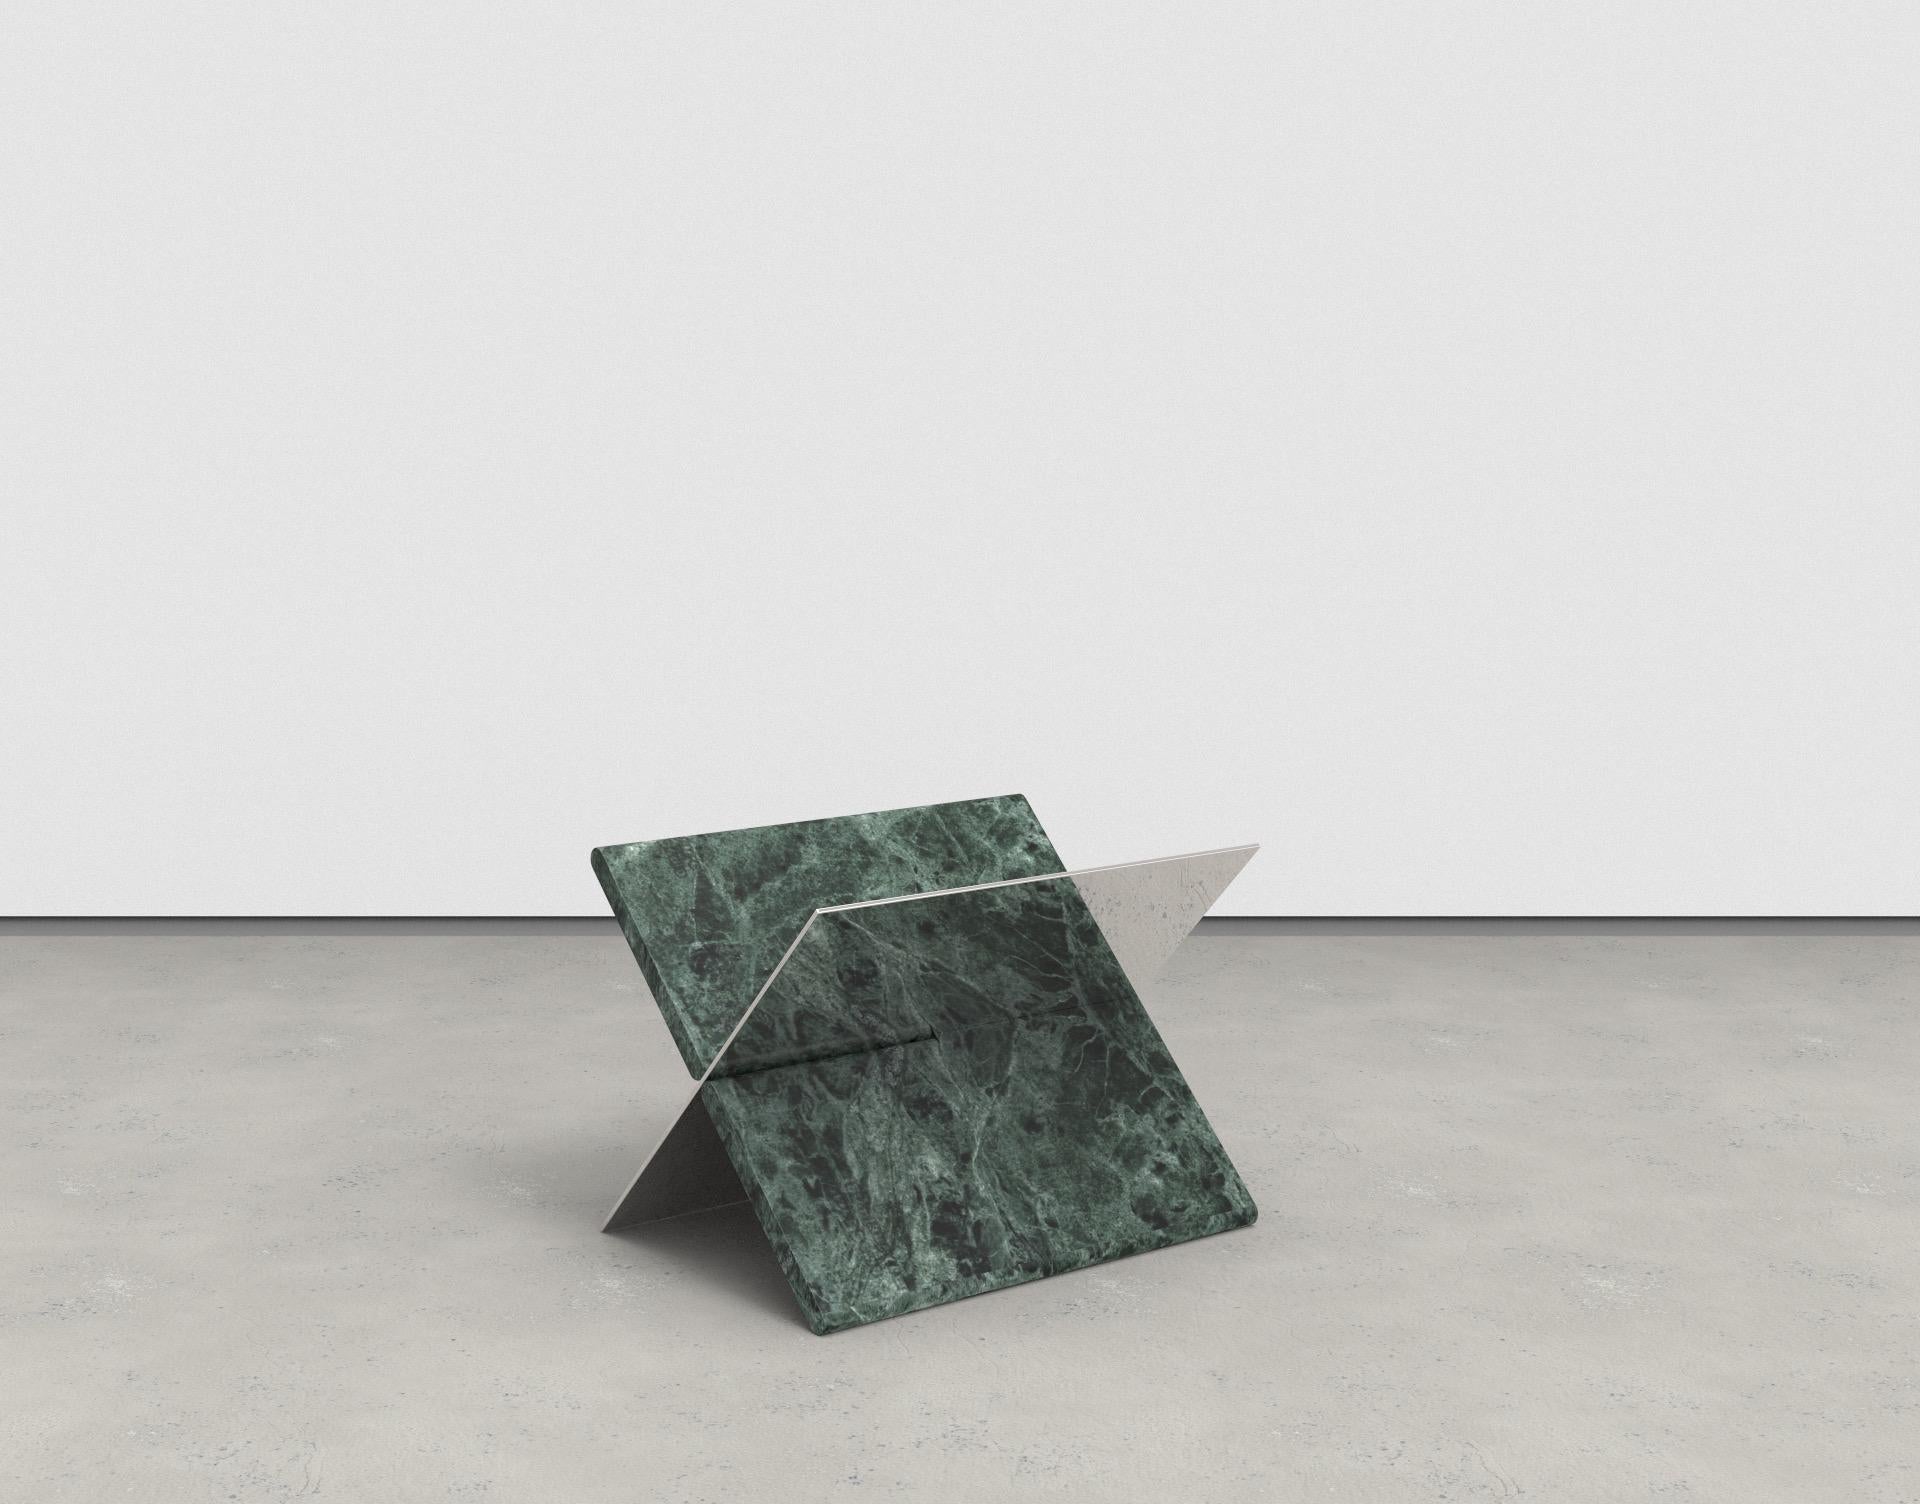 MM01 is a flat pack bookstand that puts emphasis on the material combination.
Contrasting material of natural stone and manmade reflective metal plates created an interesting composition.
Made with marble slab and reflective stainless steel plate.